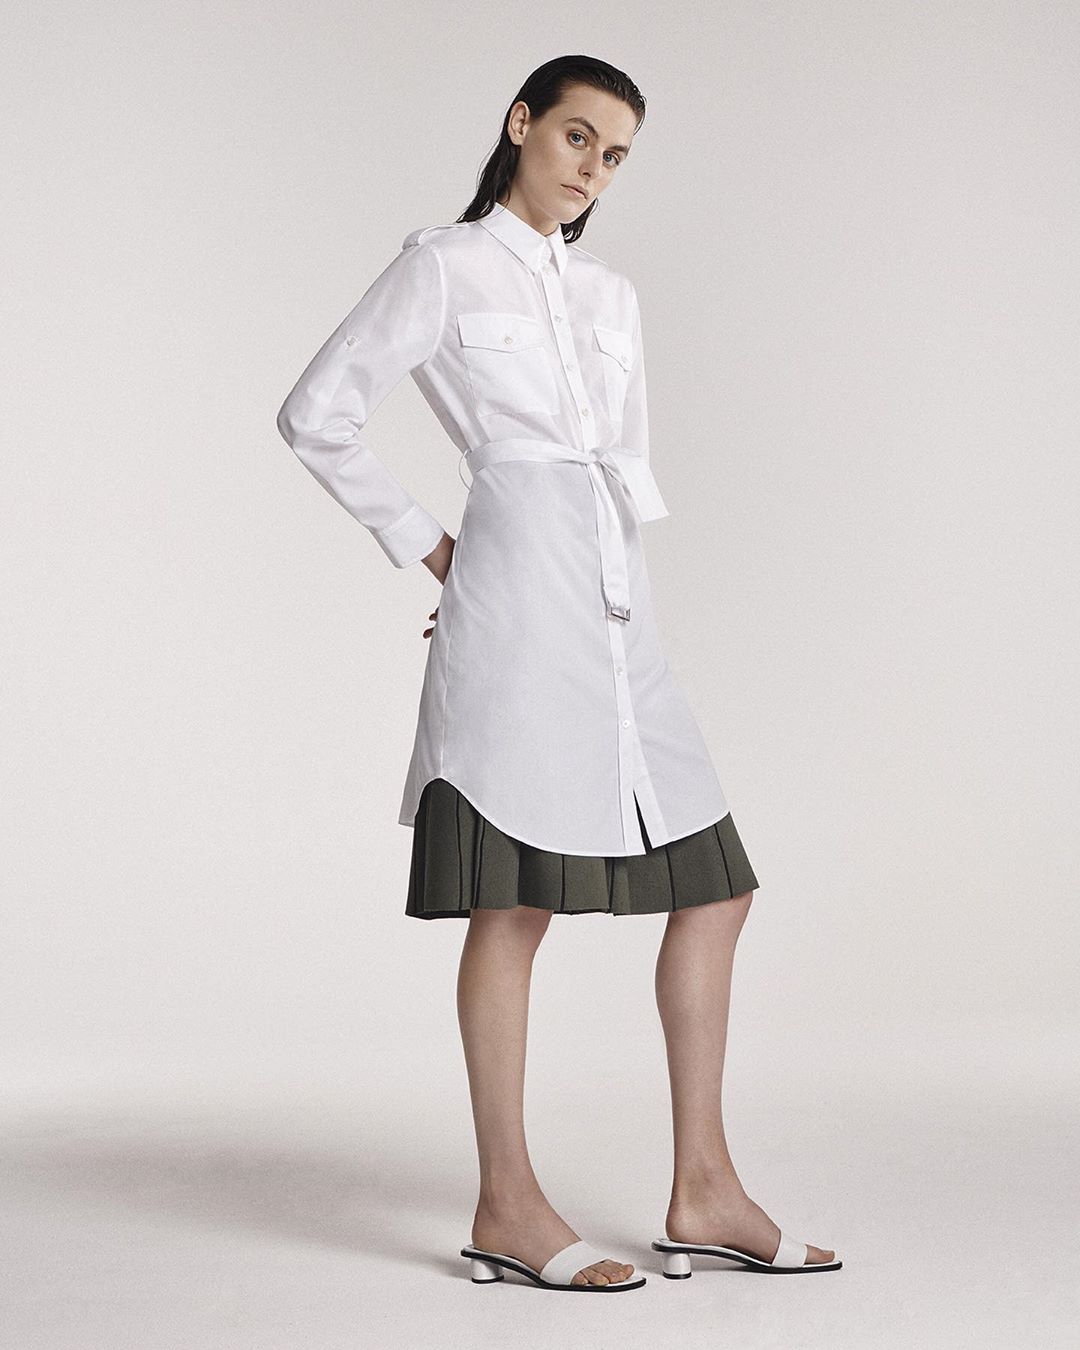 MAISON ULLENS - Build your wardrobe of versatile investment pieces with classic poplin